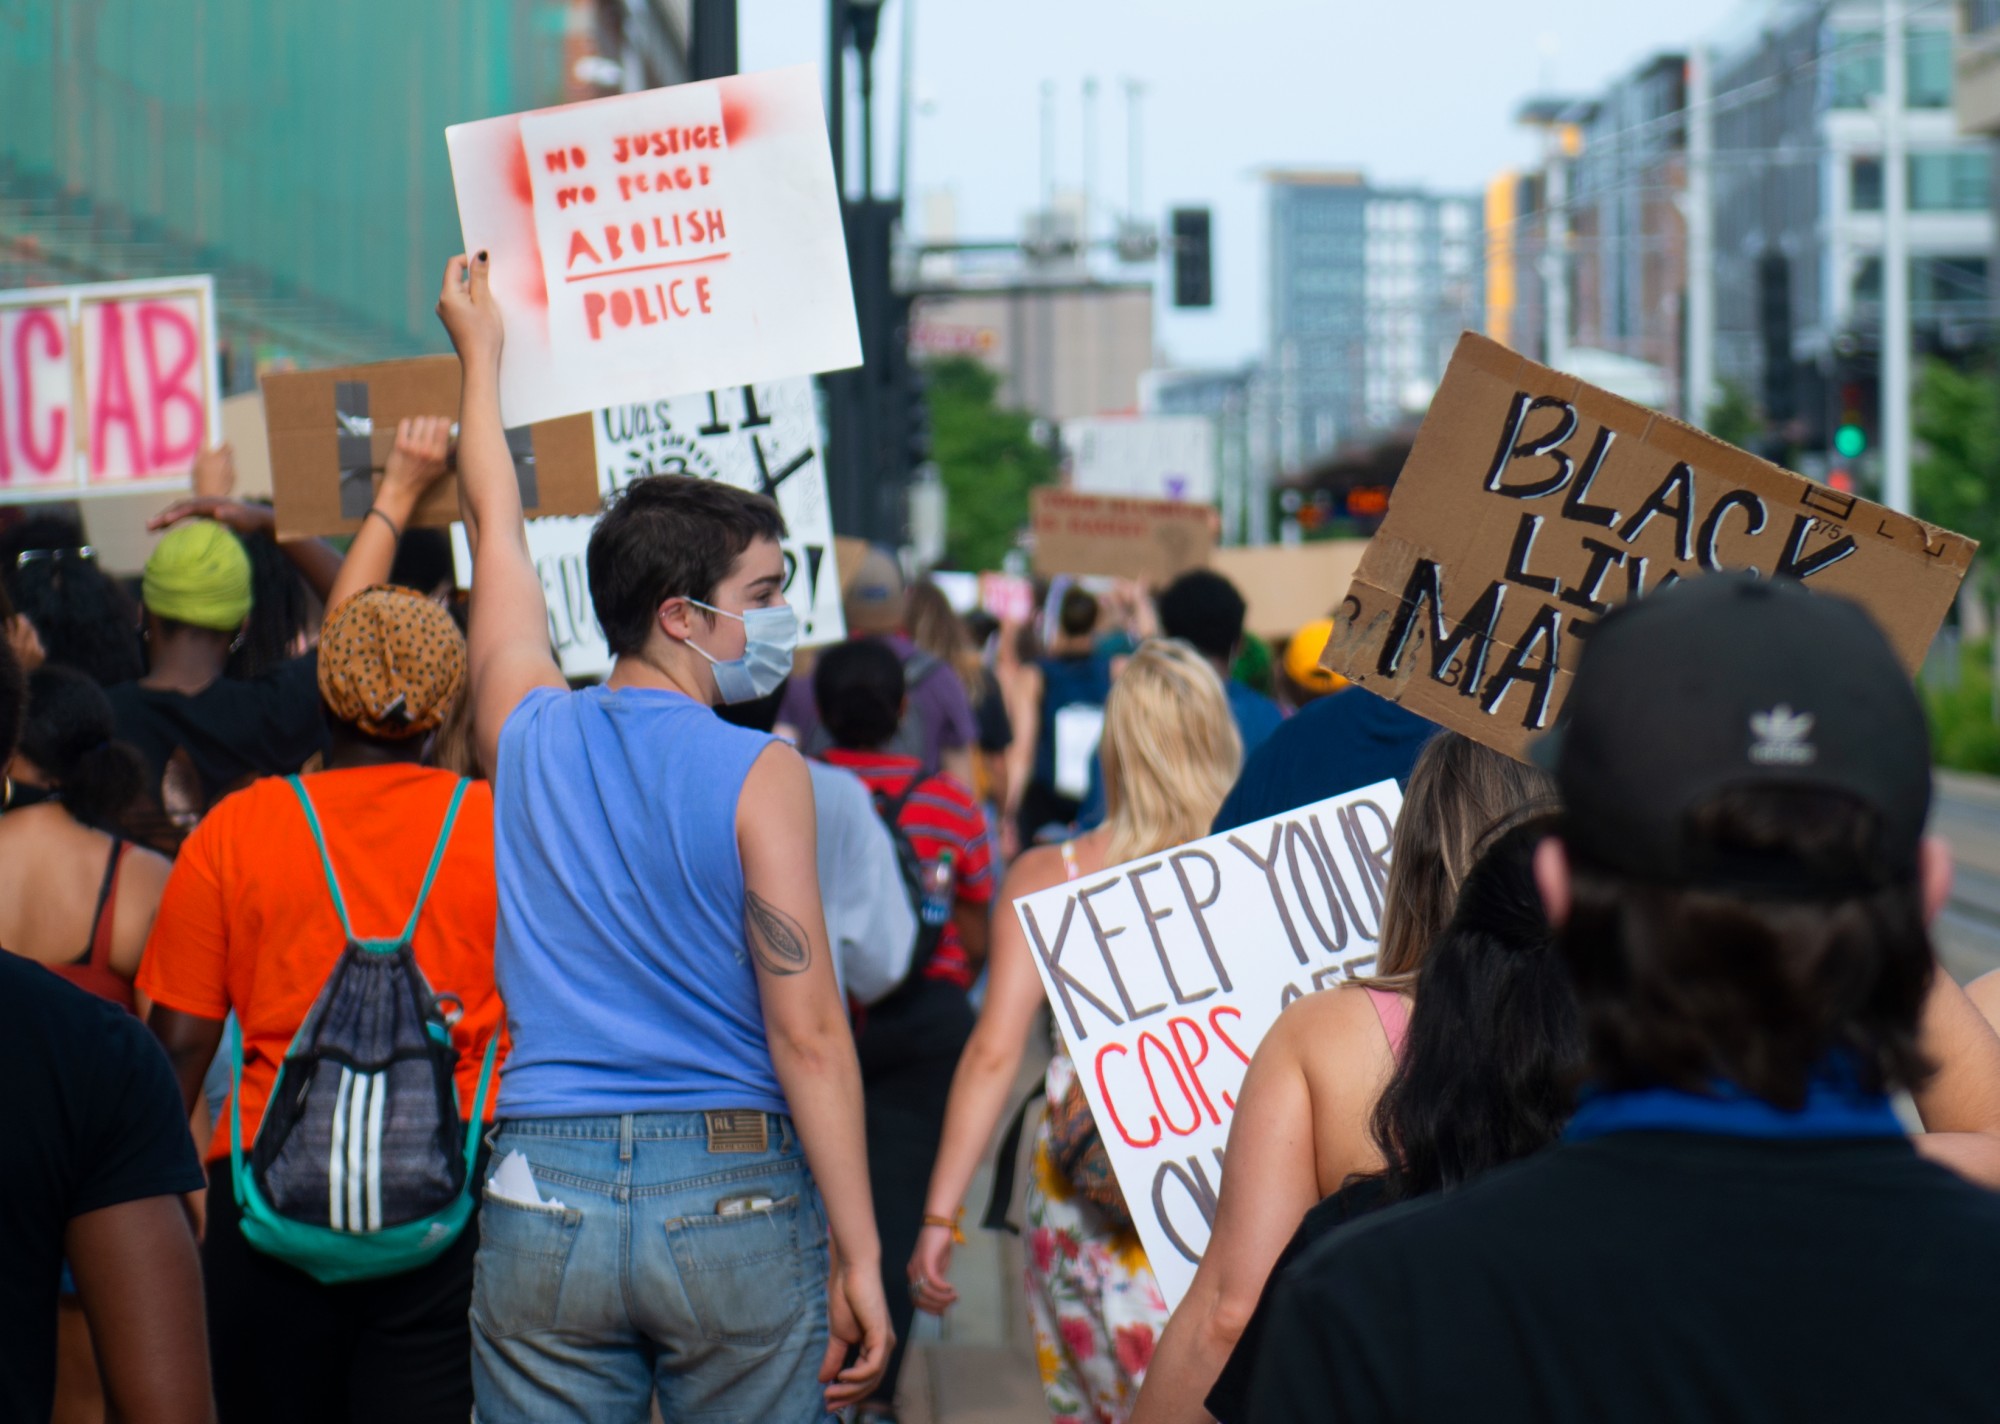 Students march towards UMPD headquarters on the University of Minnesota campus on Monday, June 15.